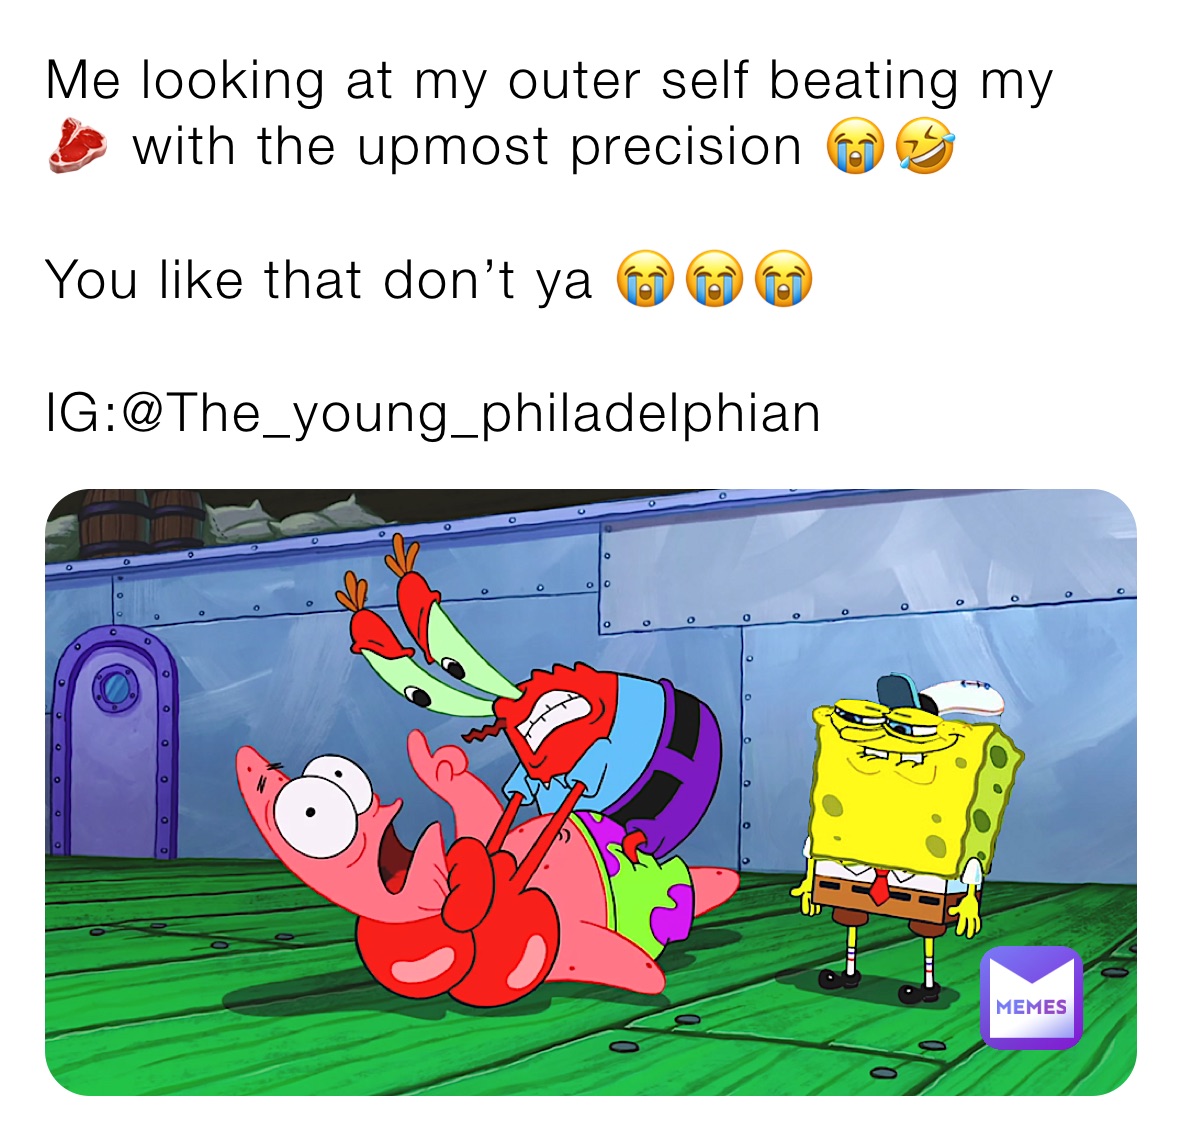 Me looking at my outer self beating my 🥩 with the upmost precision 😭🤣

You like that don’t ya 😭😭😭

IG:@The_young_philadelphian